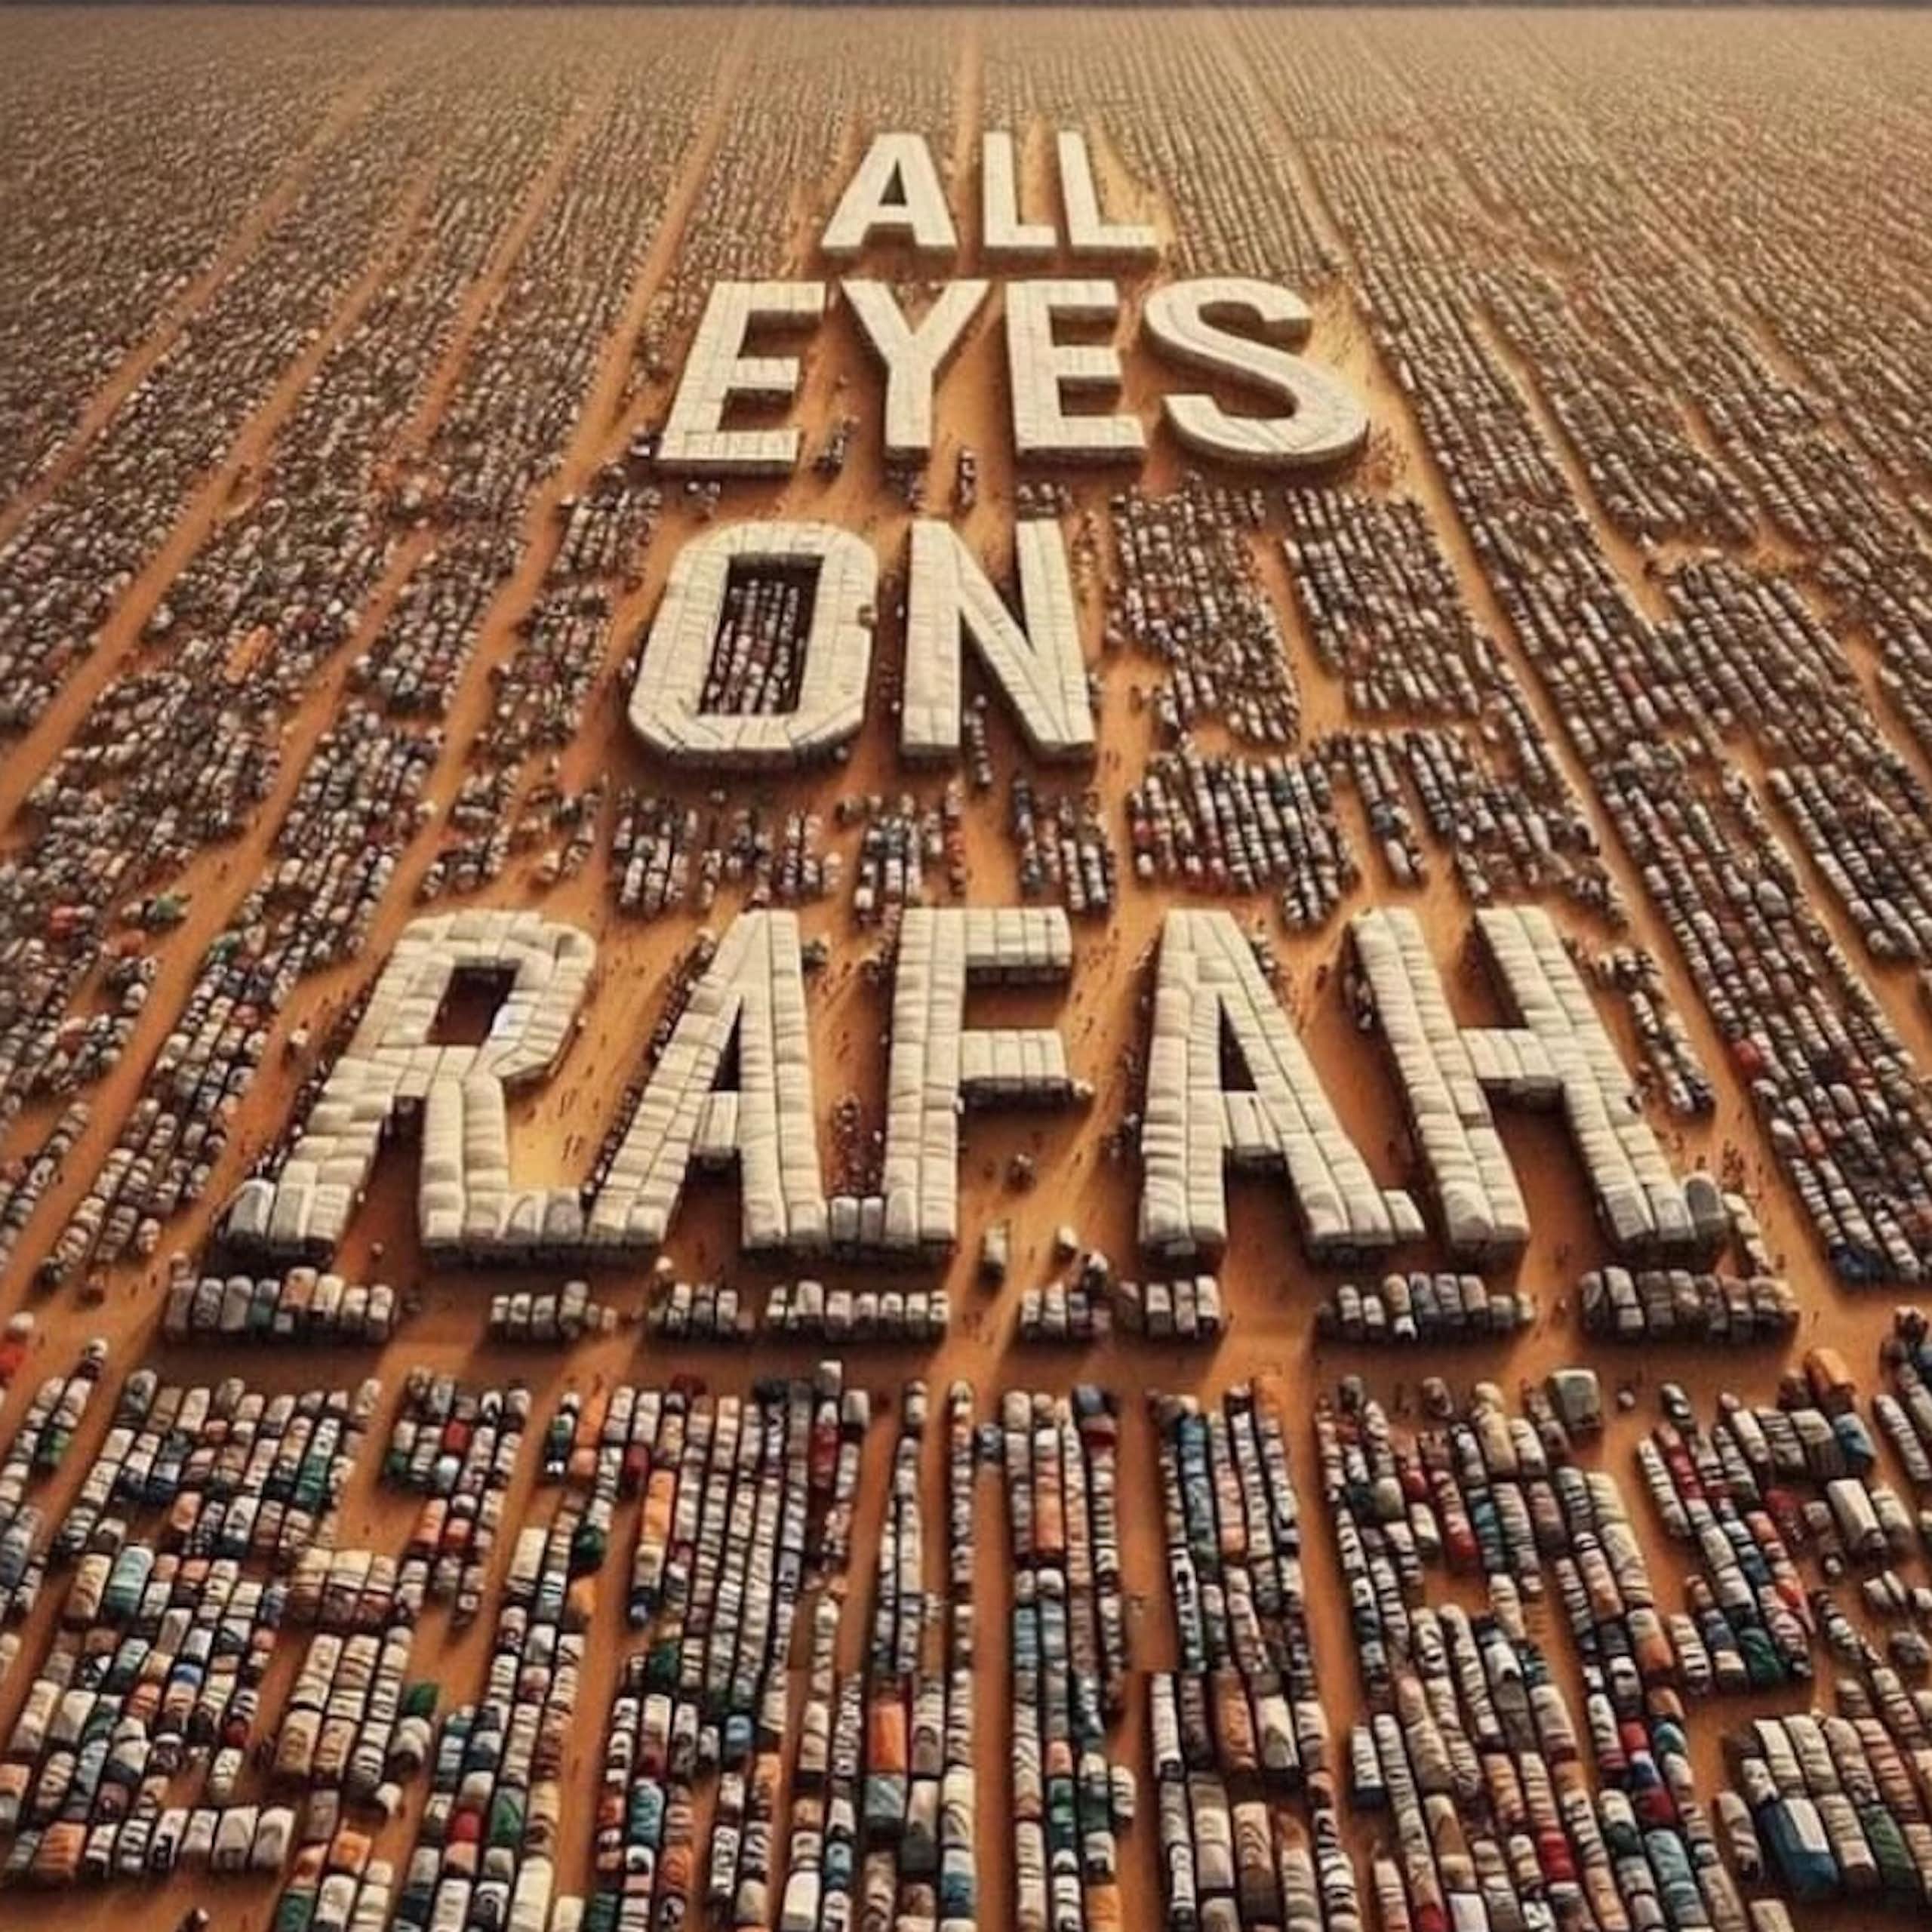 All Eyes on Rafah: sharing images of war comes with a moral responsibility. What can we make of this AI-generated anomaly?